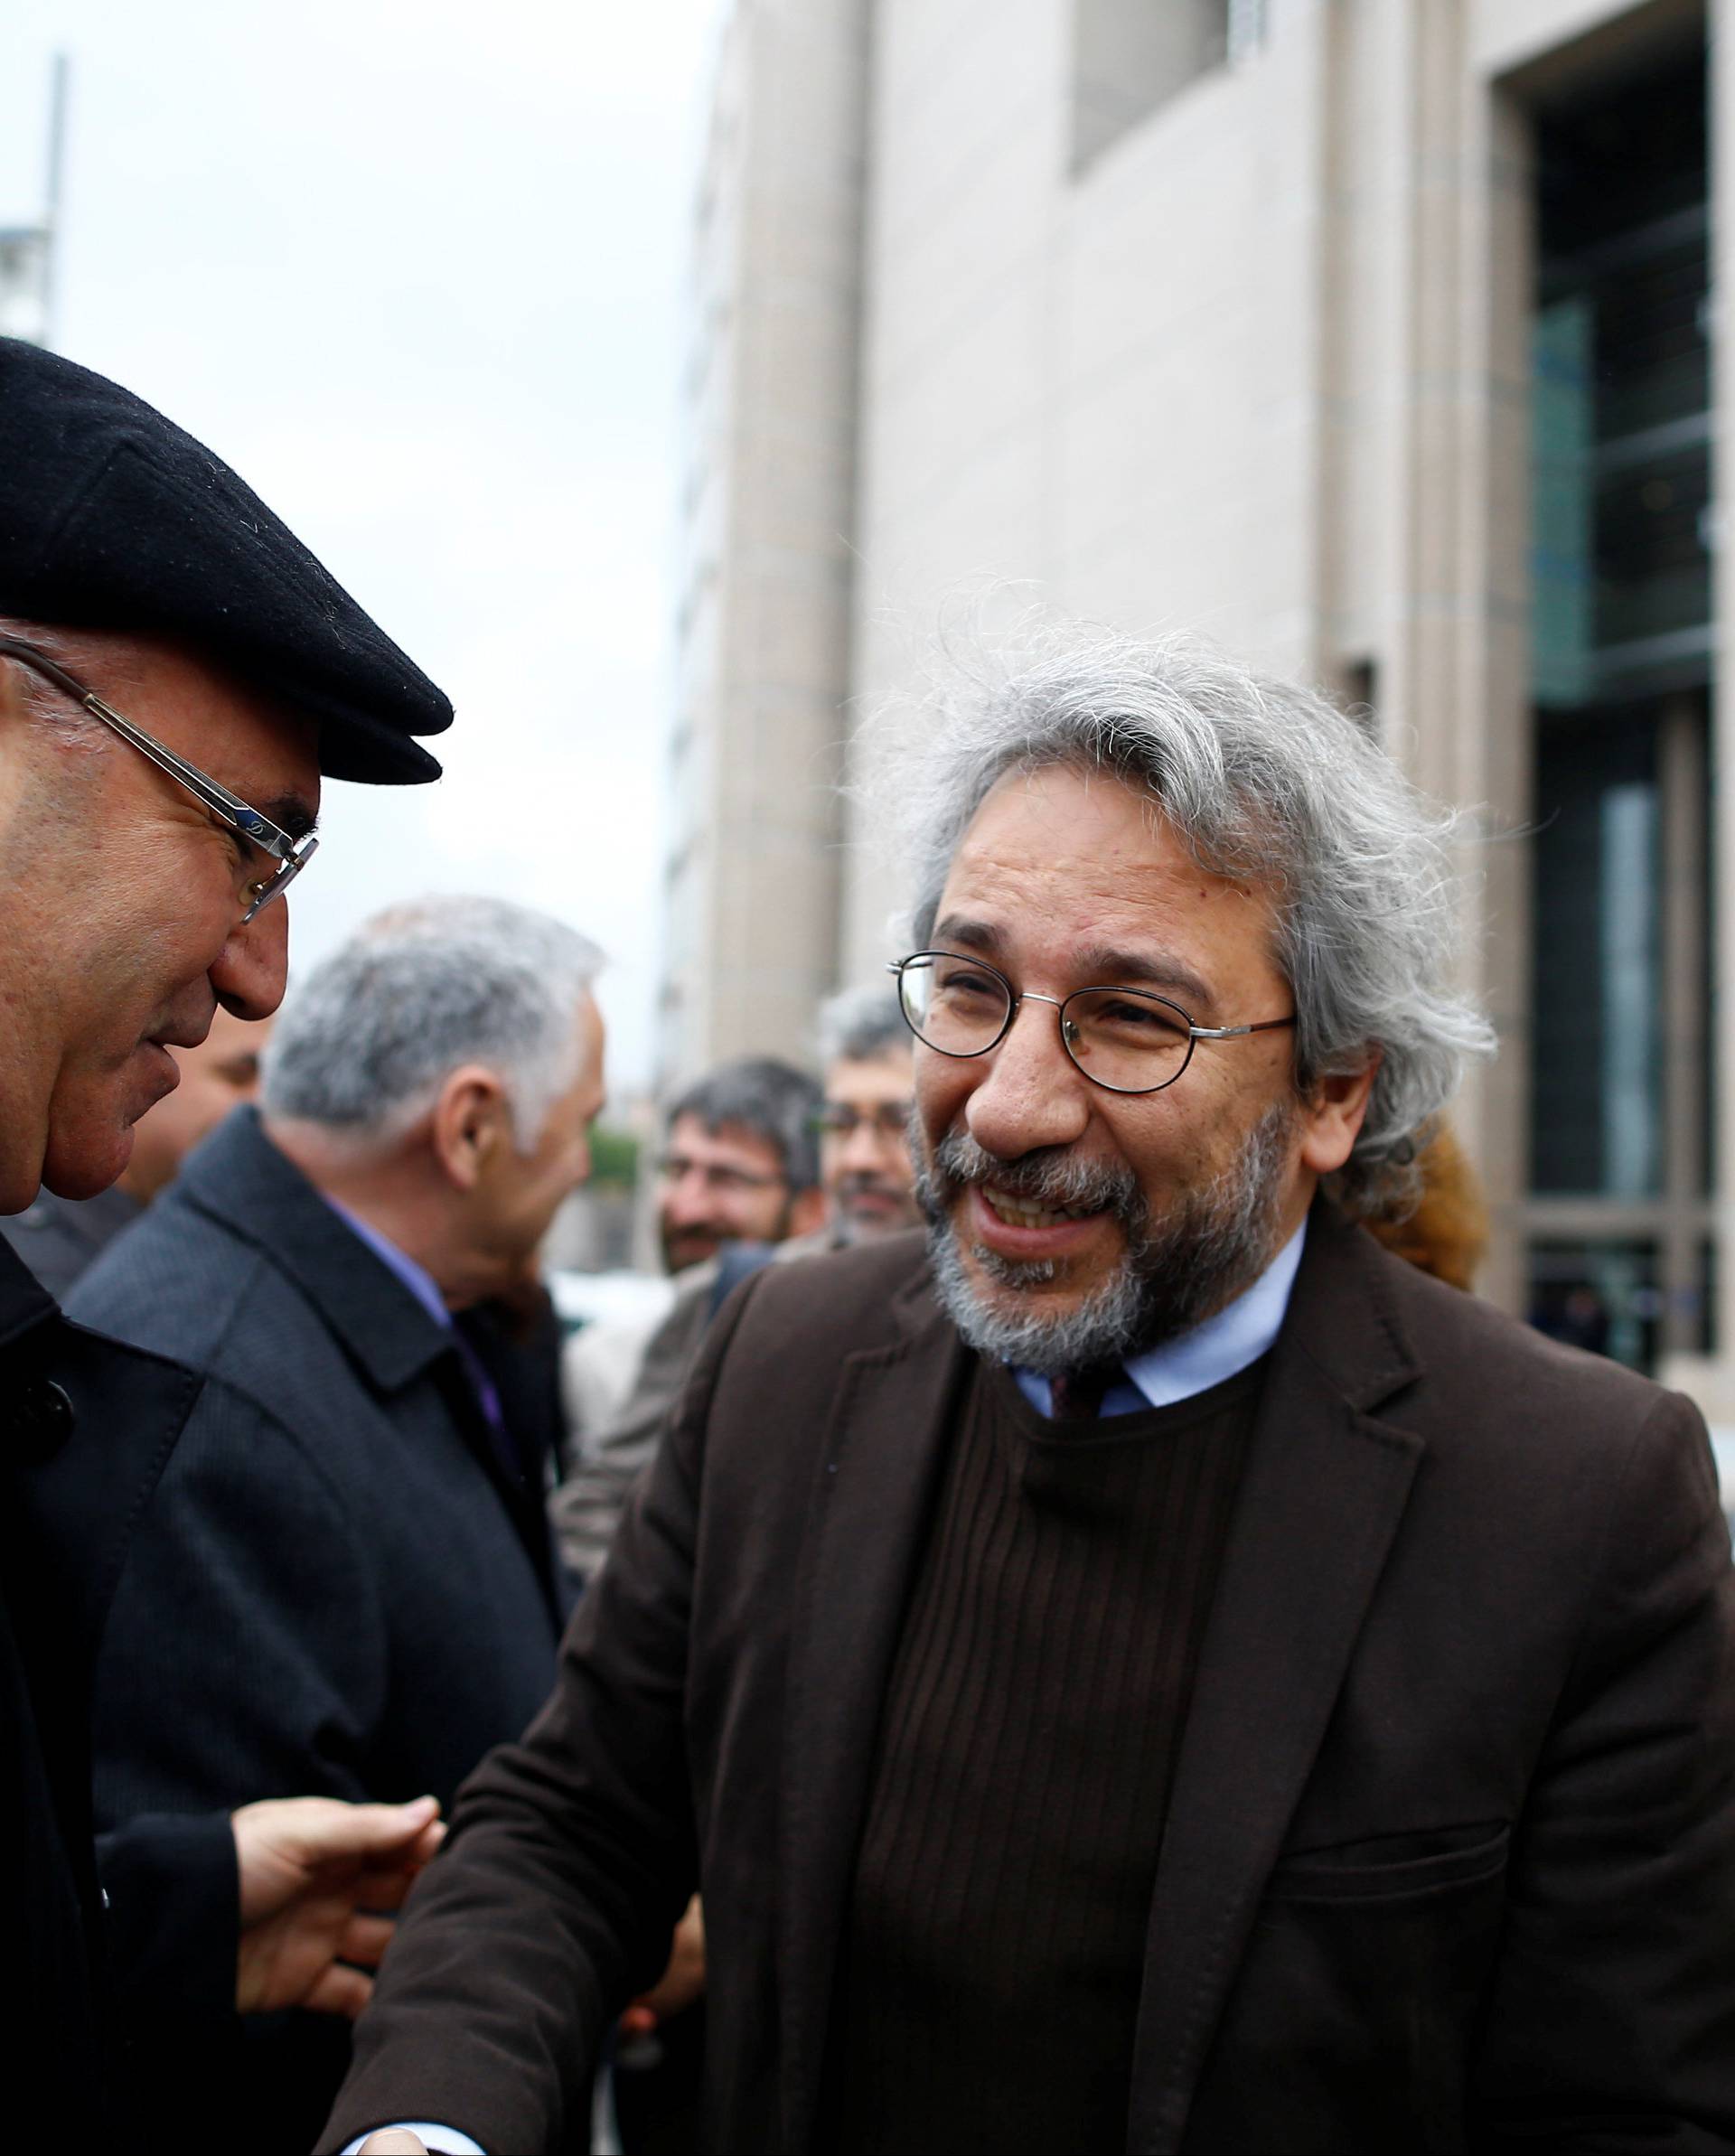 Dundar, editor-in-chief of Cumhuriyet, arrives at the Justice Palace in Istanbul